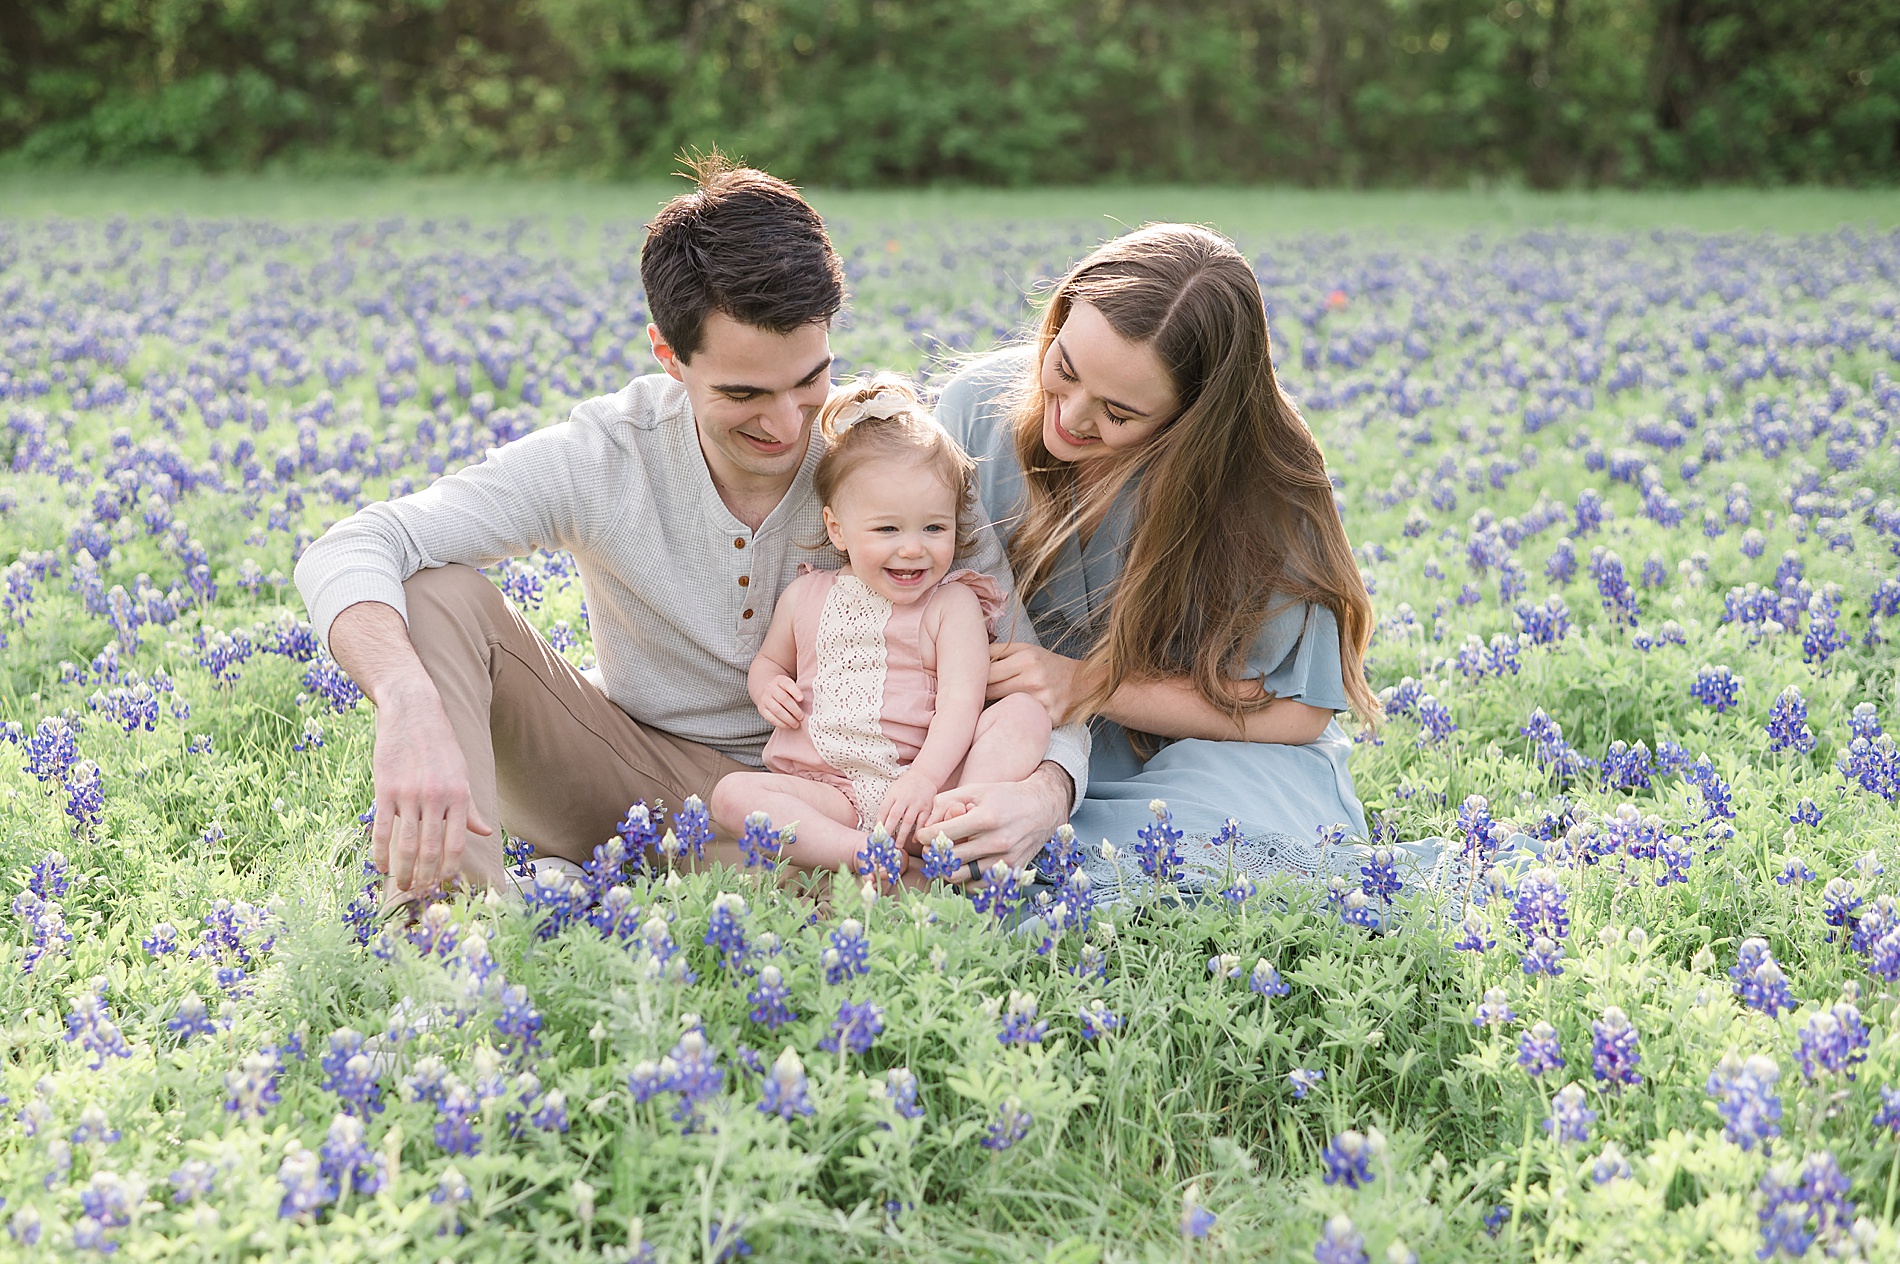 parents sit with their little girl in a field of bluebonnets photographed by Lindsey Dutton Photography, a Dallas family photographer